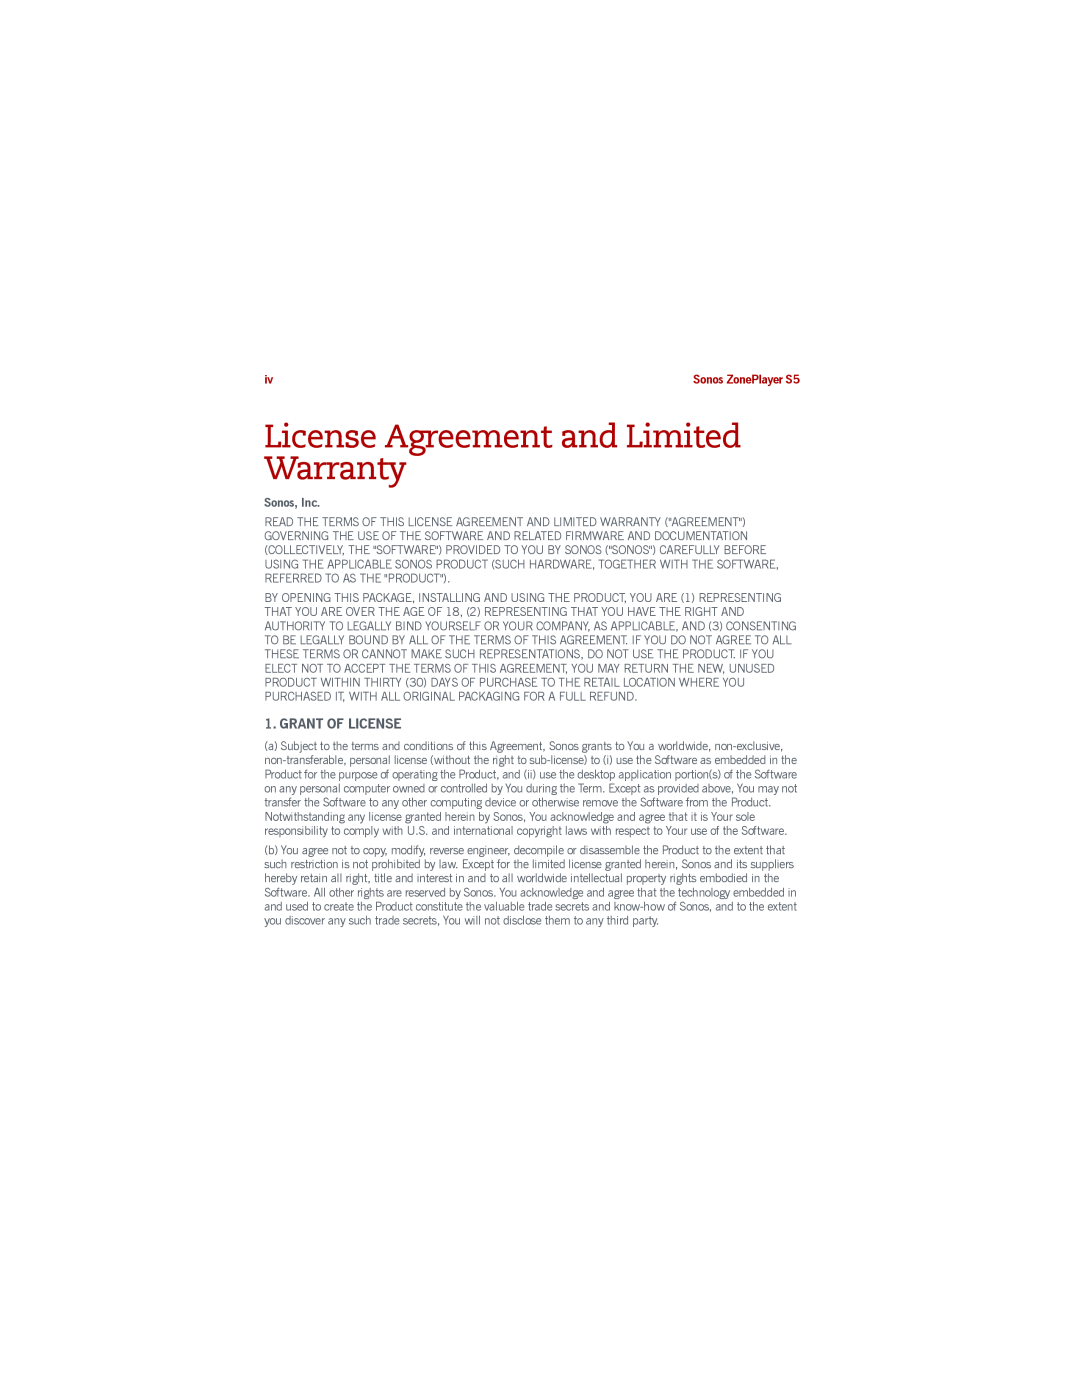 Sonos manual License Agreement and Limited Warranty, English, Grant Of License, Sonos, Inc, Sonos ZonePlayer S5 